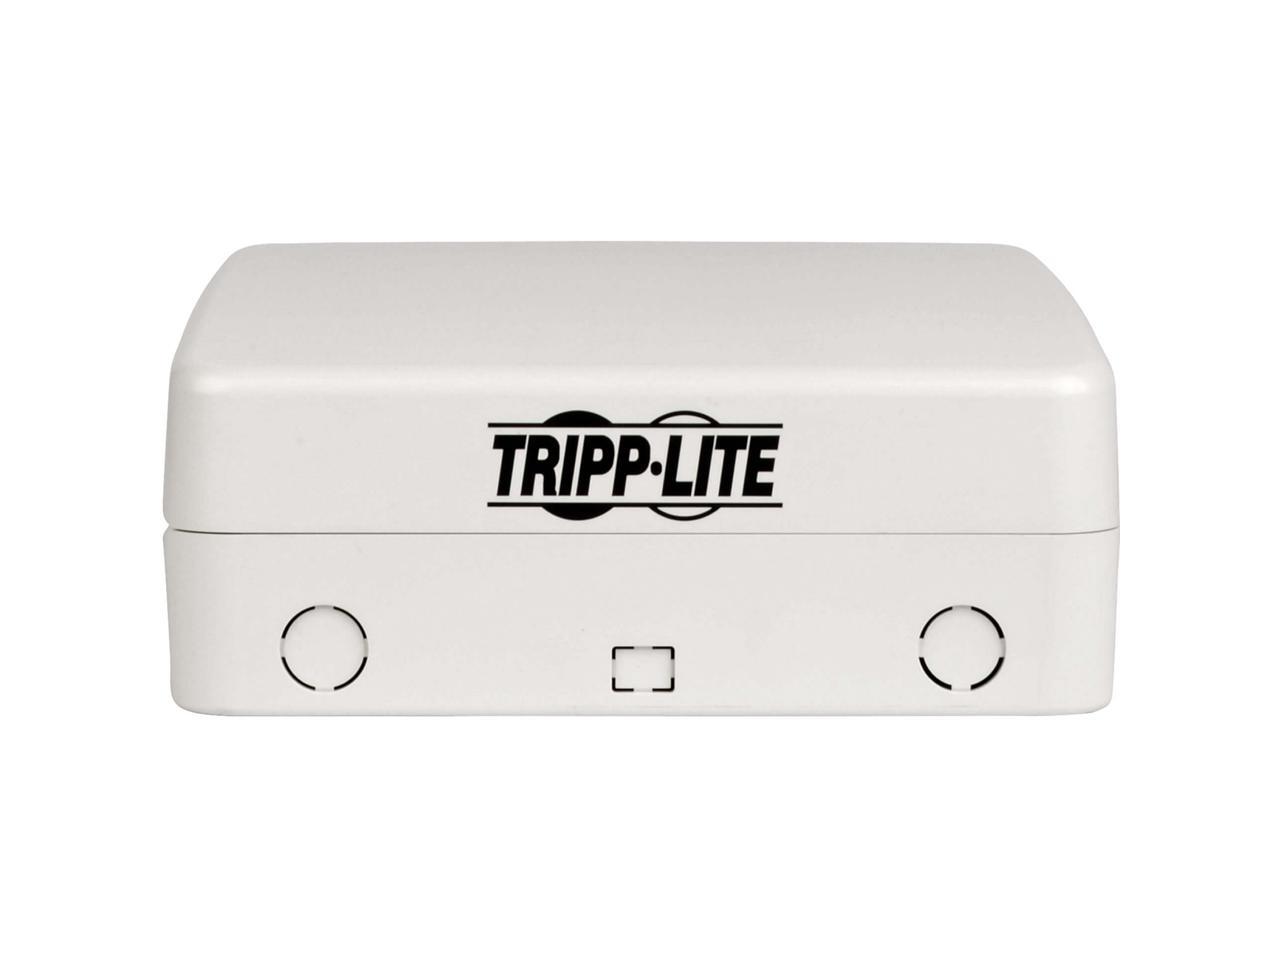 Tripp Lite EN1812 Mounting Box for Wireless Access Point, Router, Modem - White